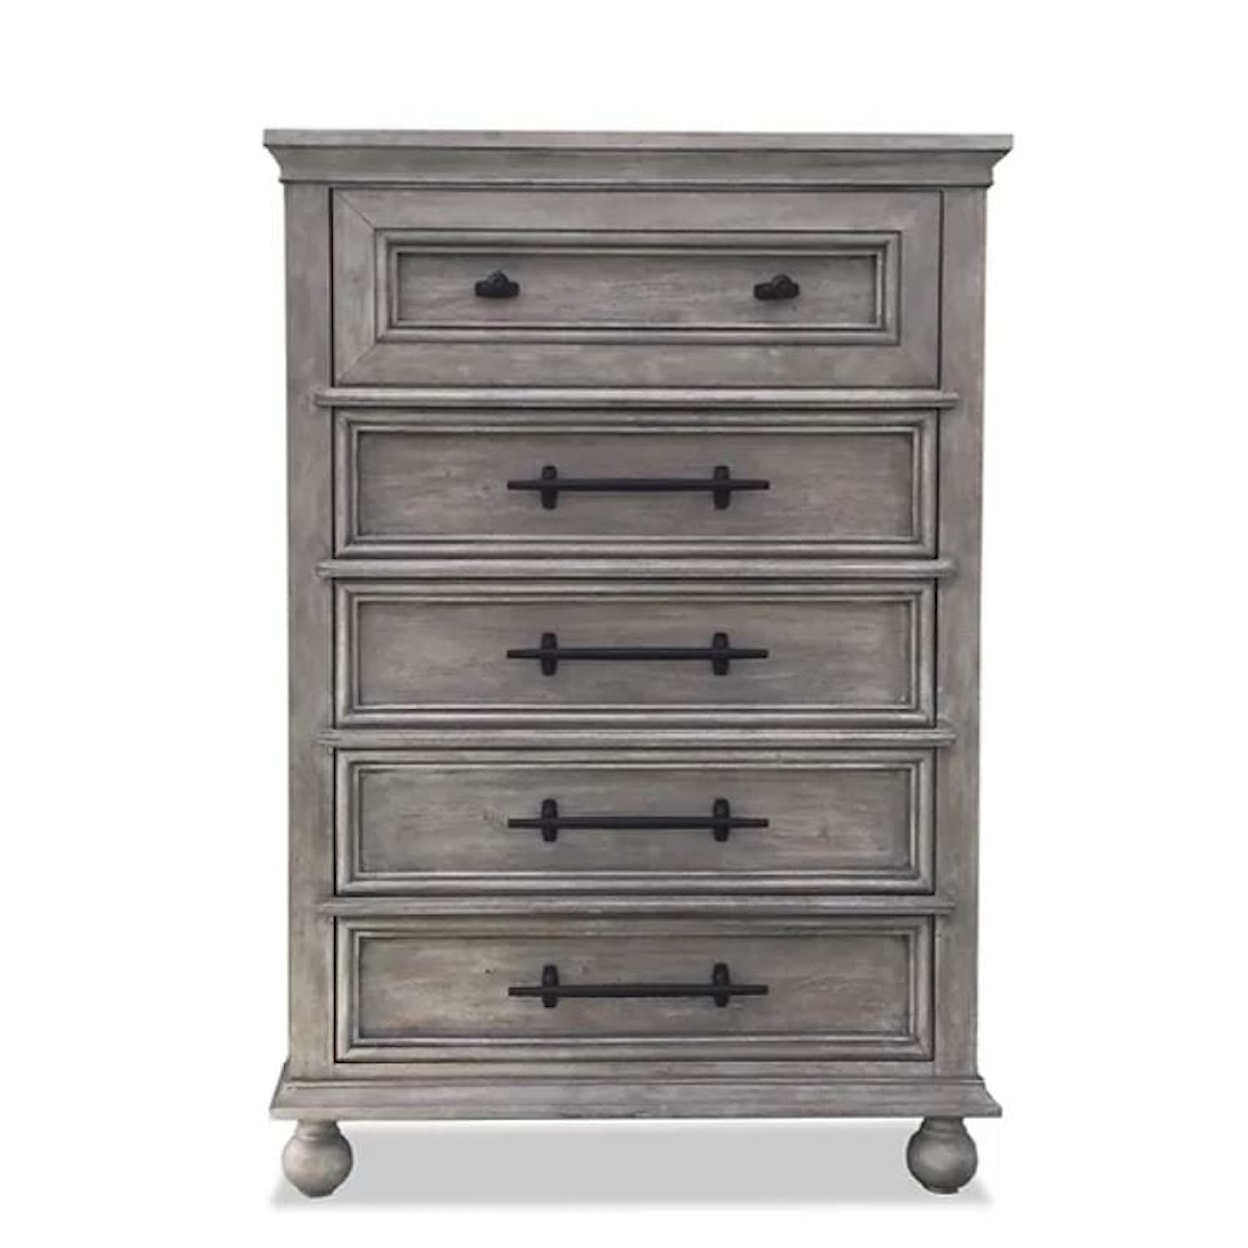 DesignWorks Furniture Summer Place Chest of Drawers